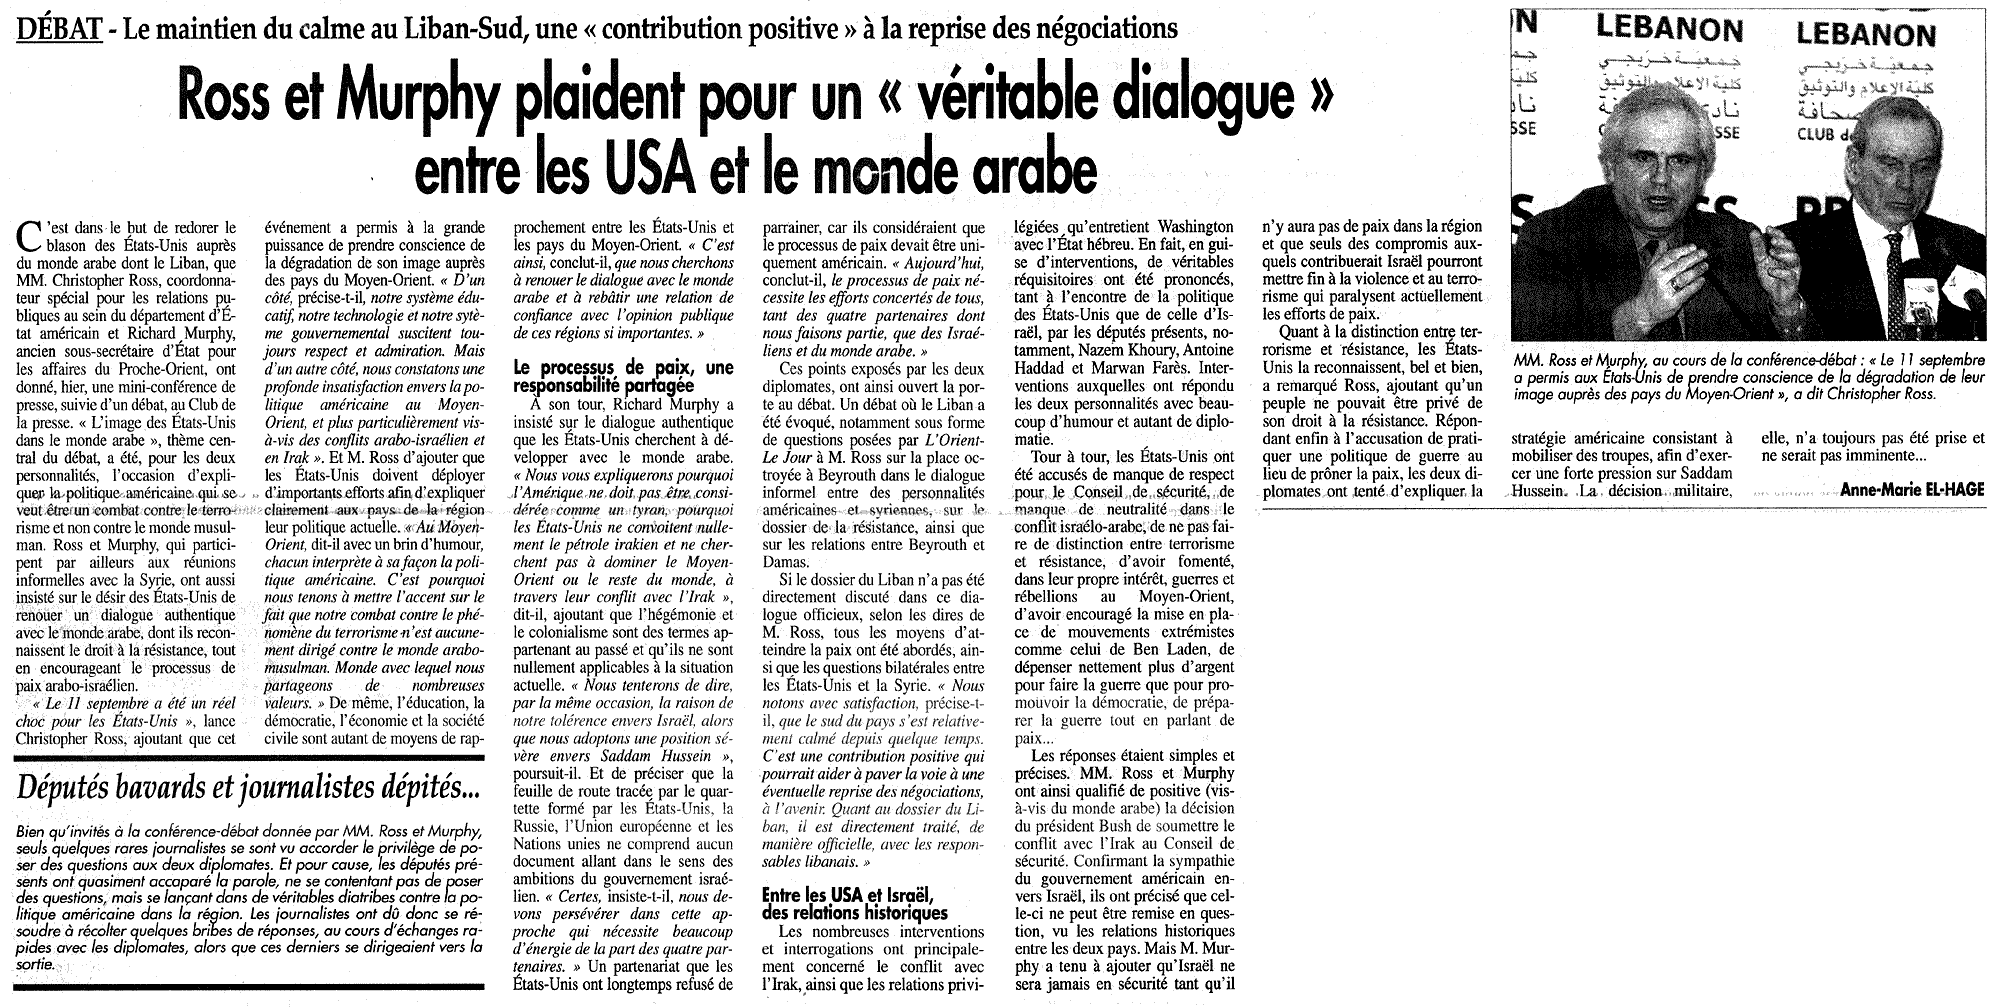 Image showing text scanned from a newspaper or magazine